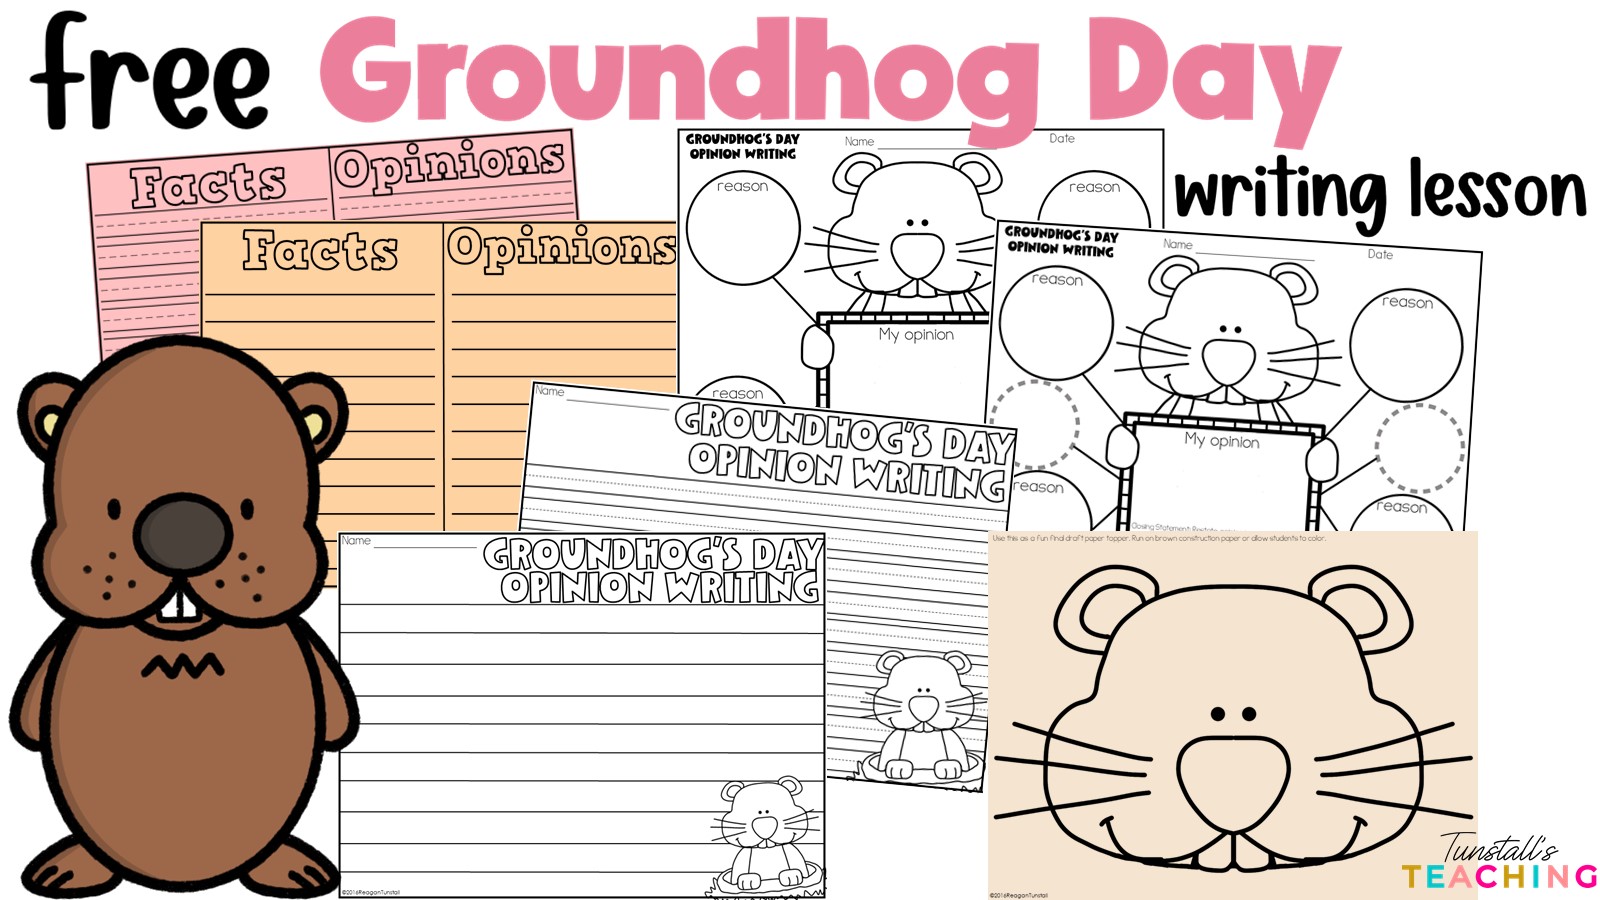 Free Groundhog Day Fact and Opinion Writing Lesson